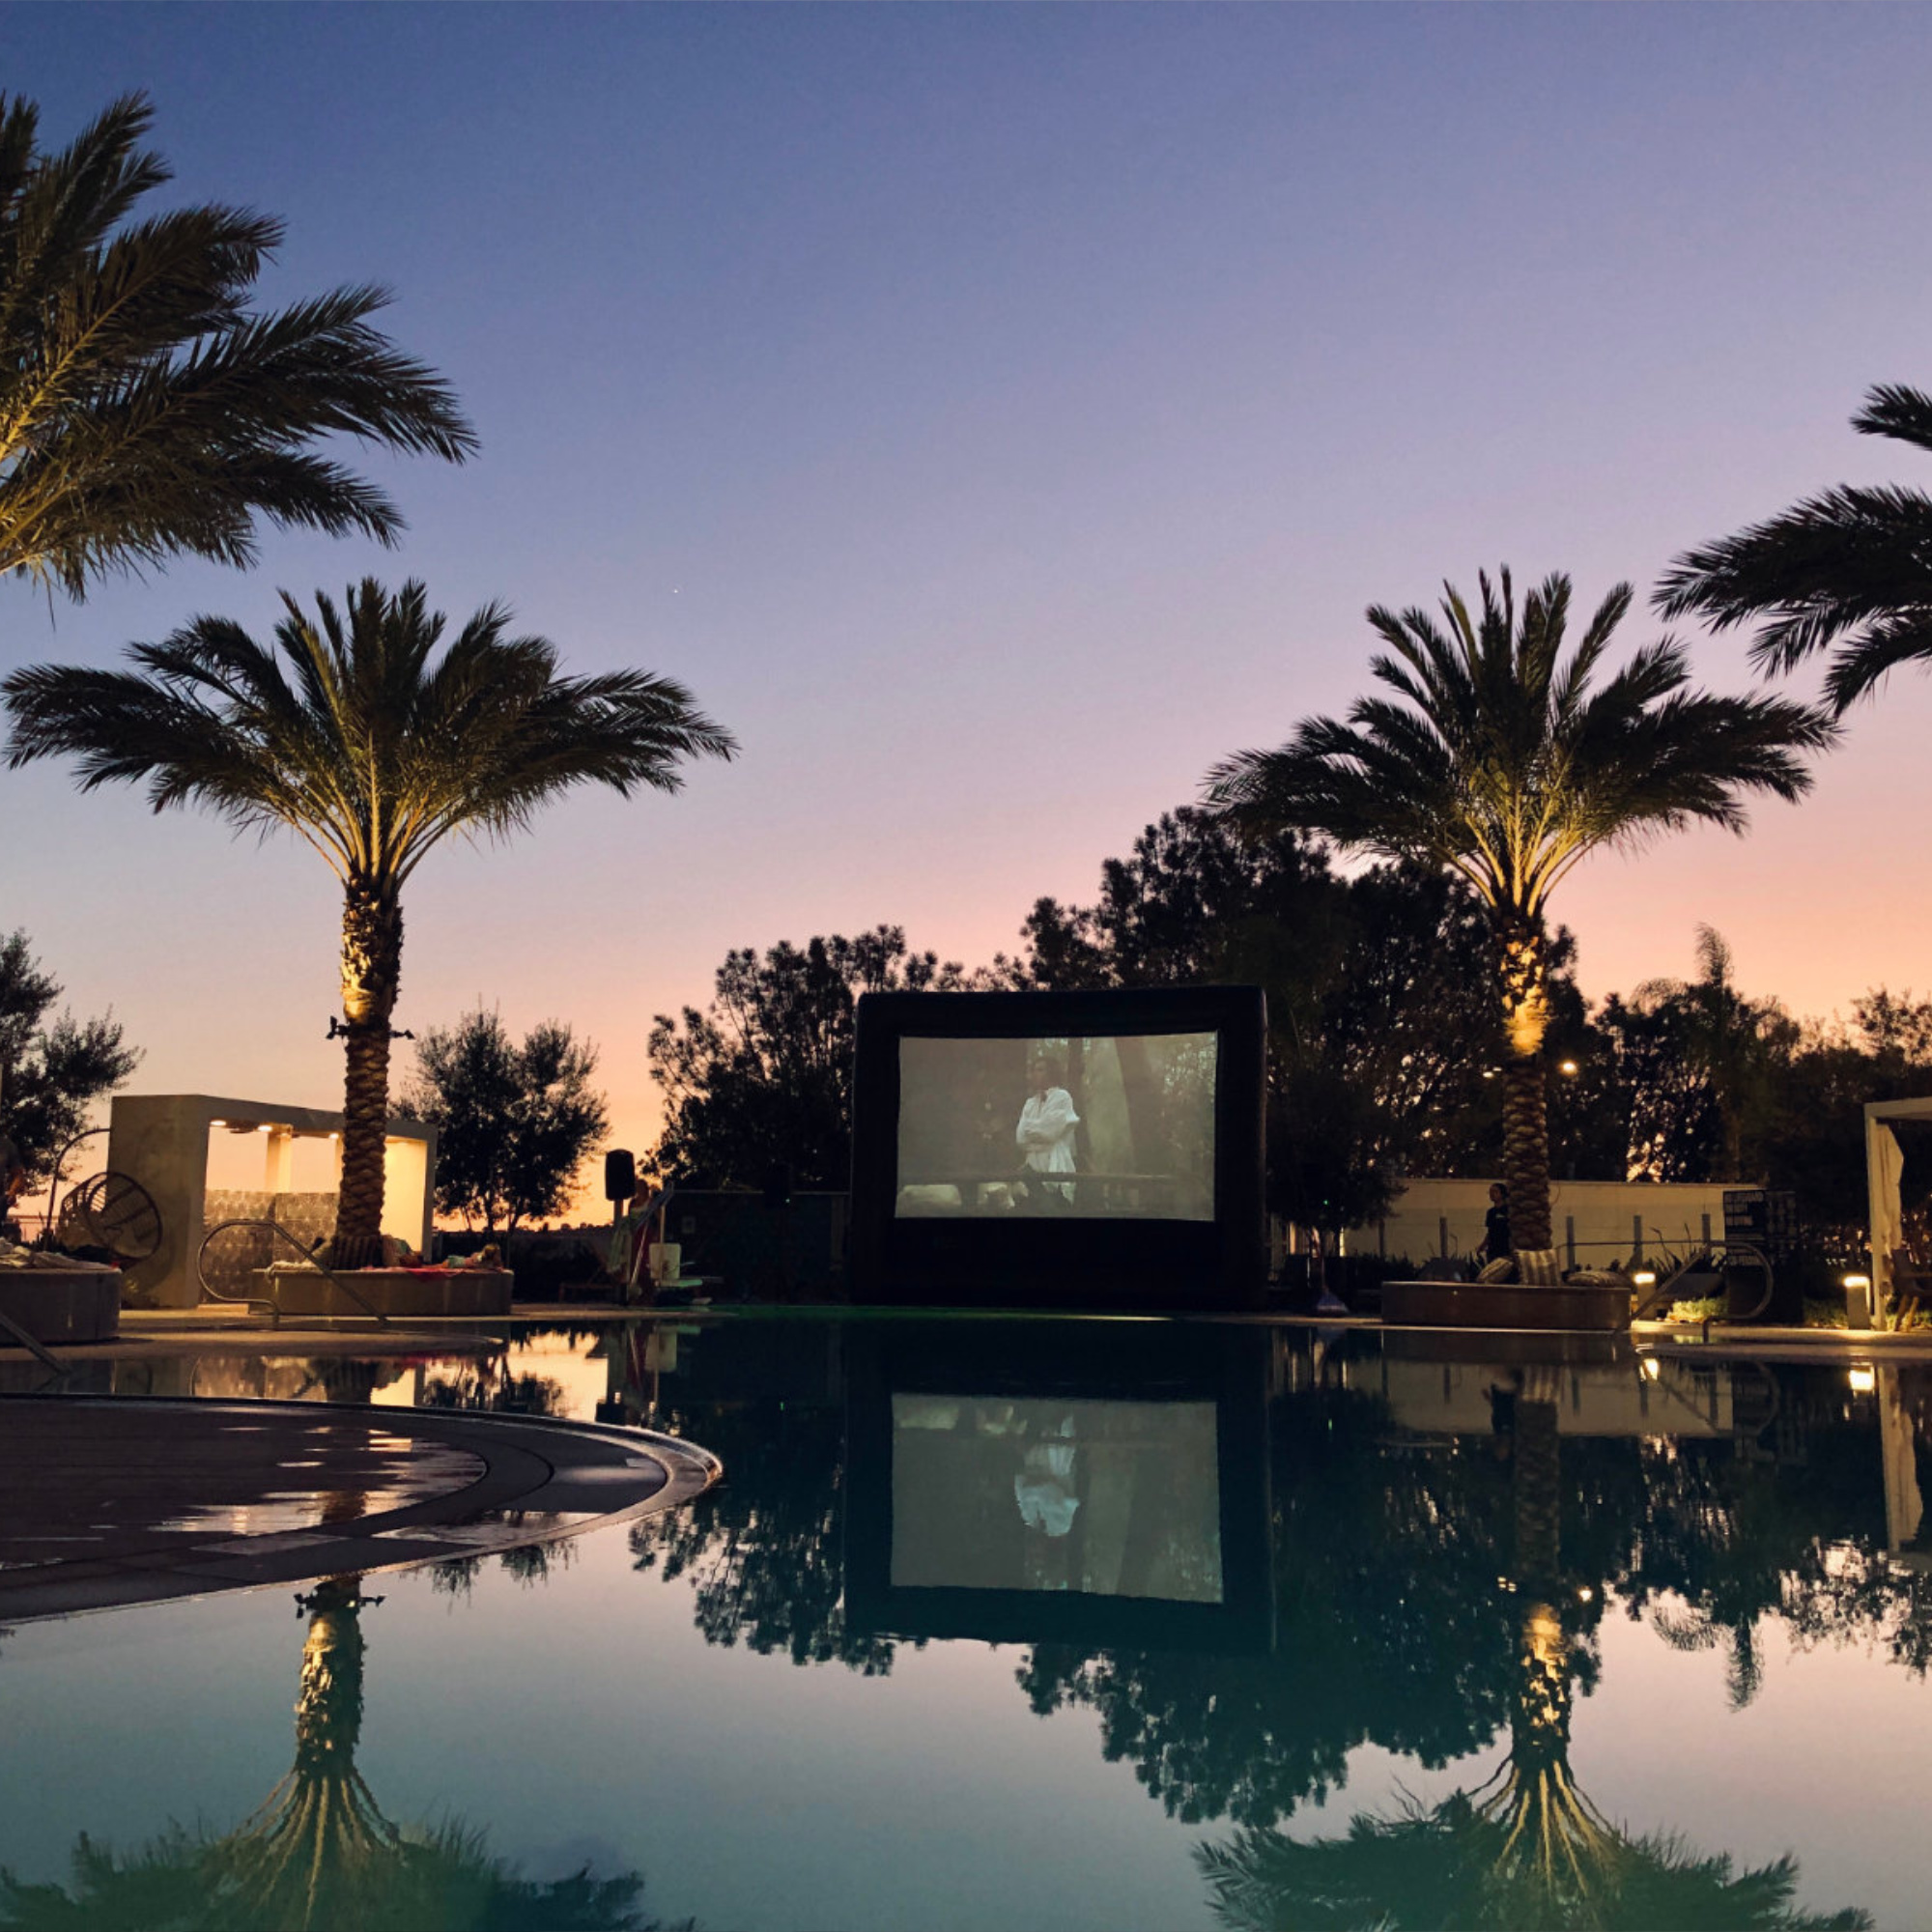 Inflatable movie screen by the pool